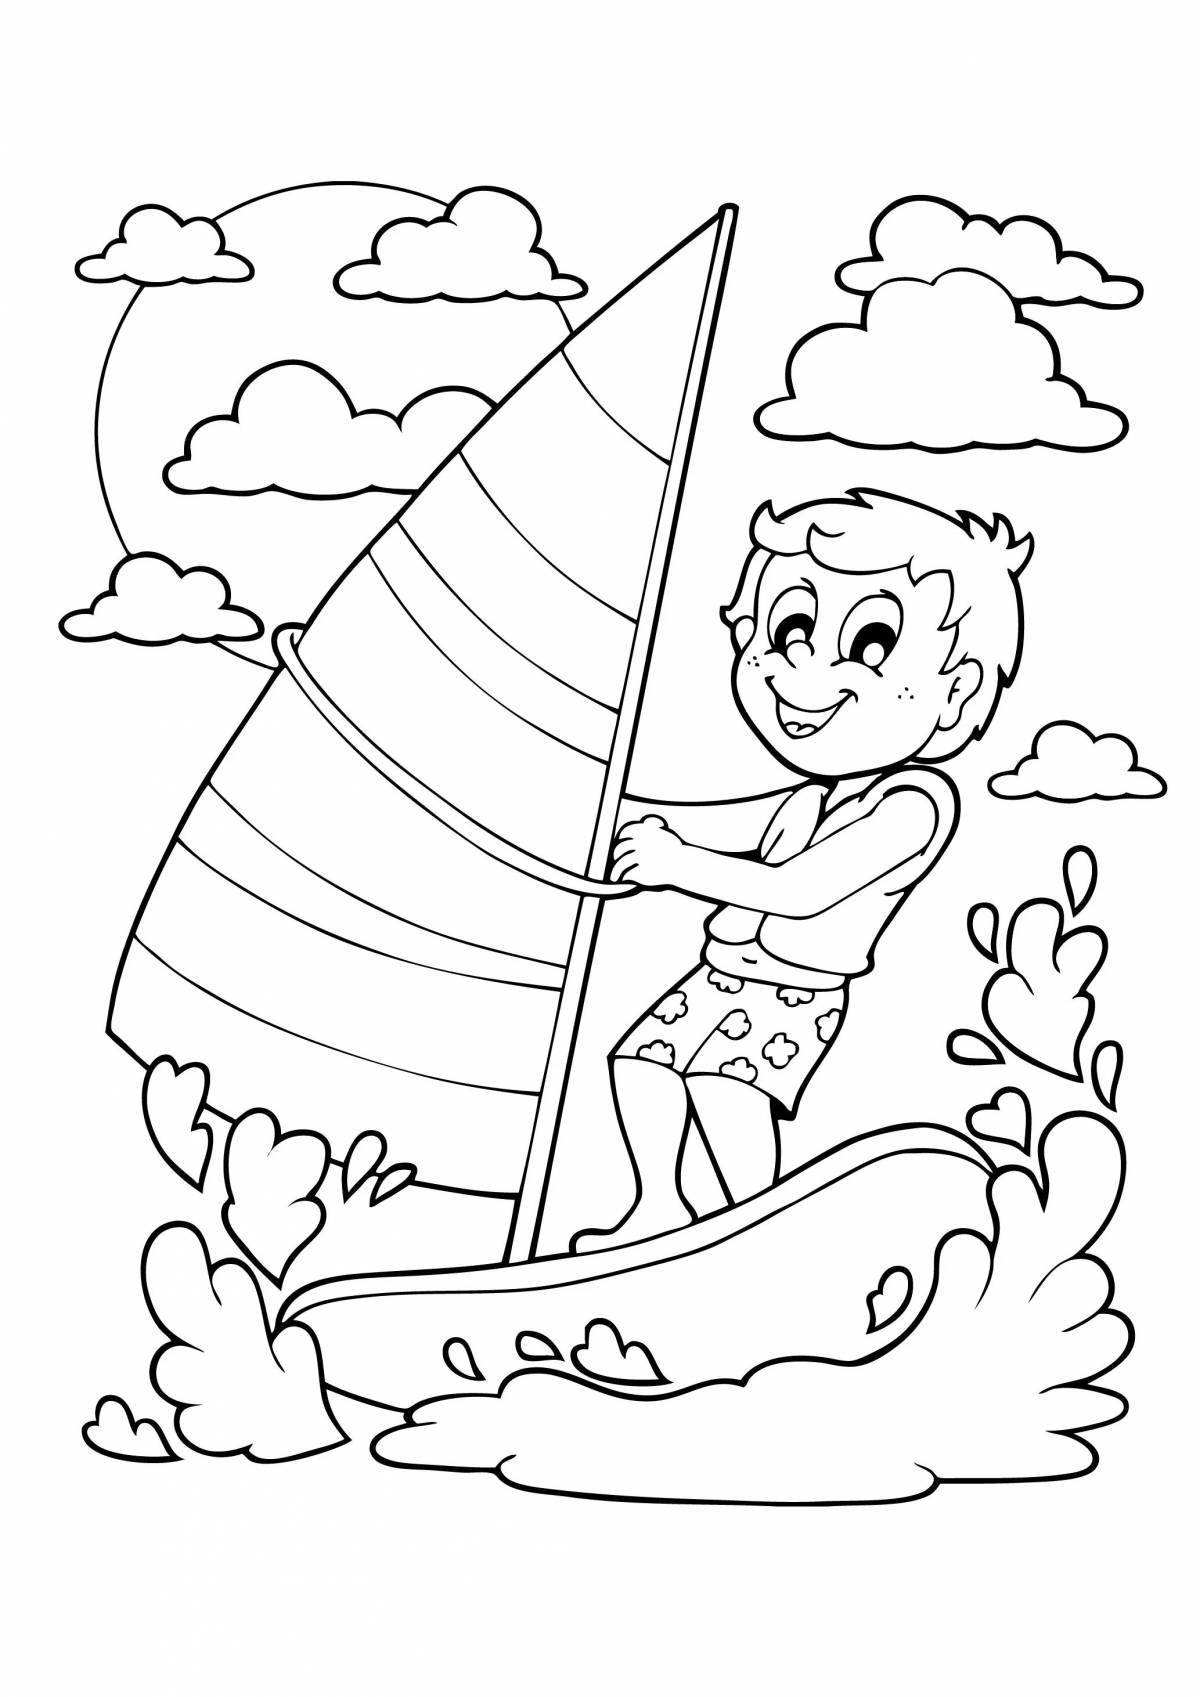 Glowing surf coloring page